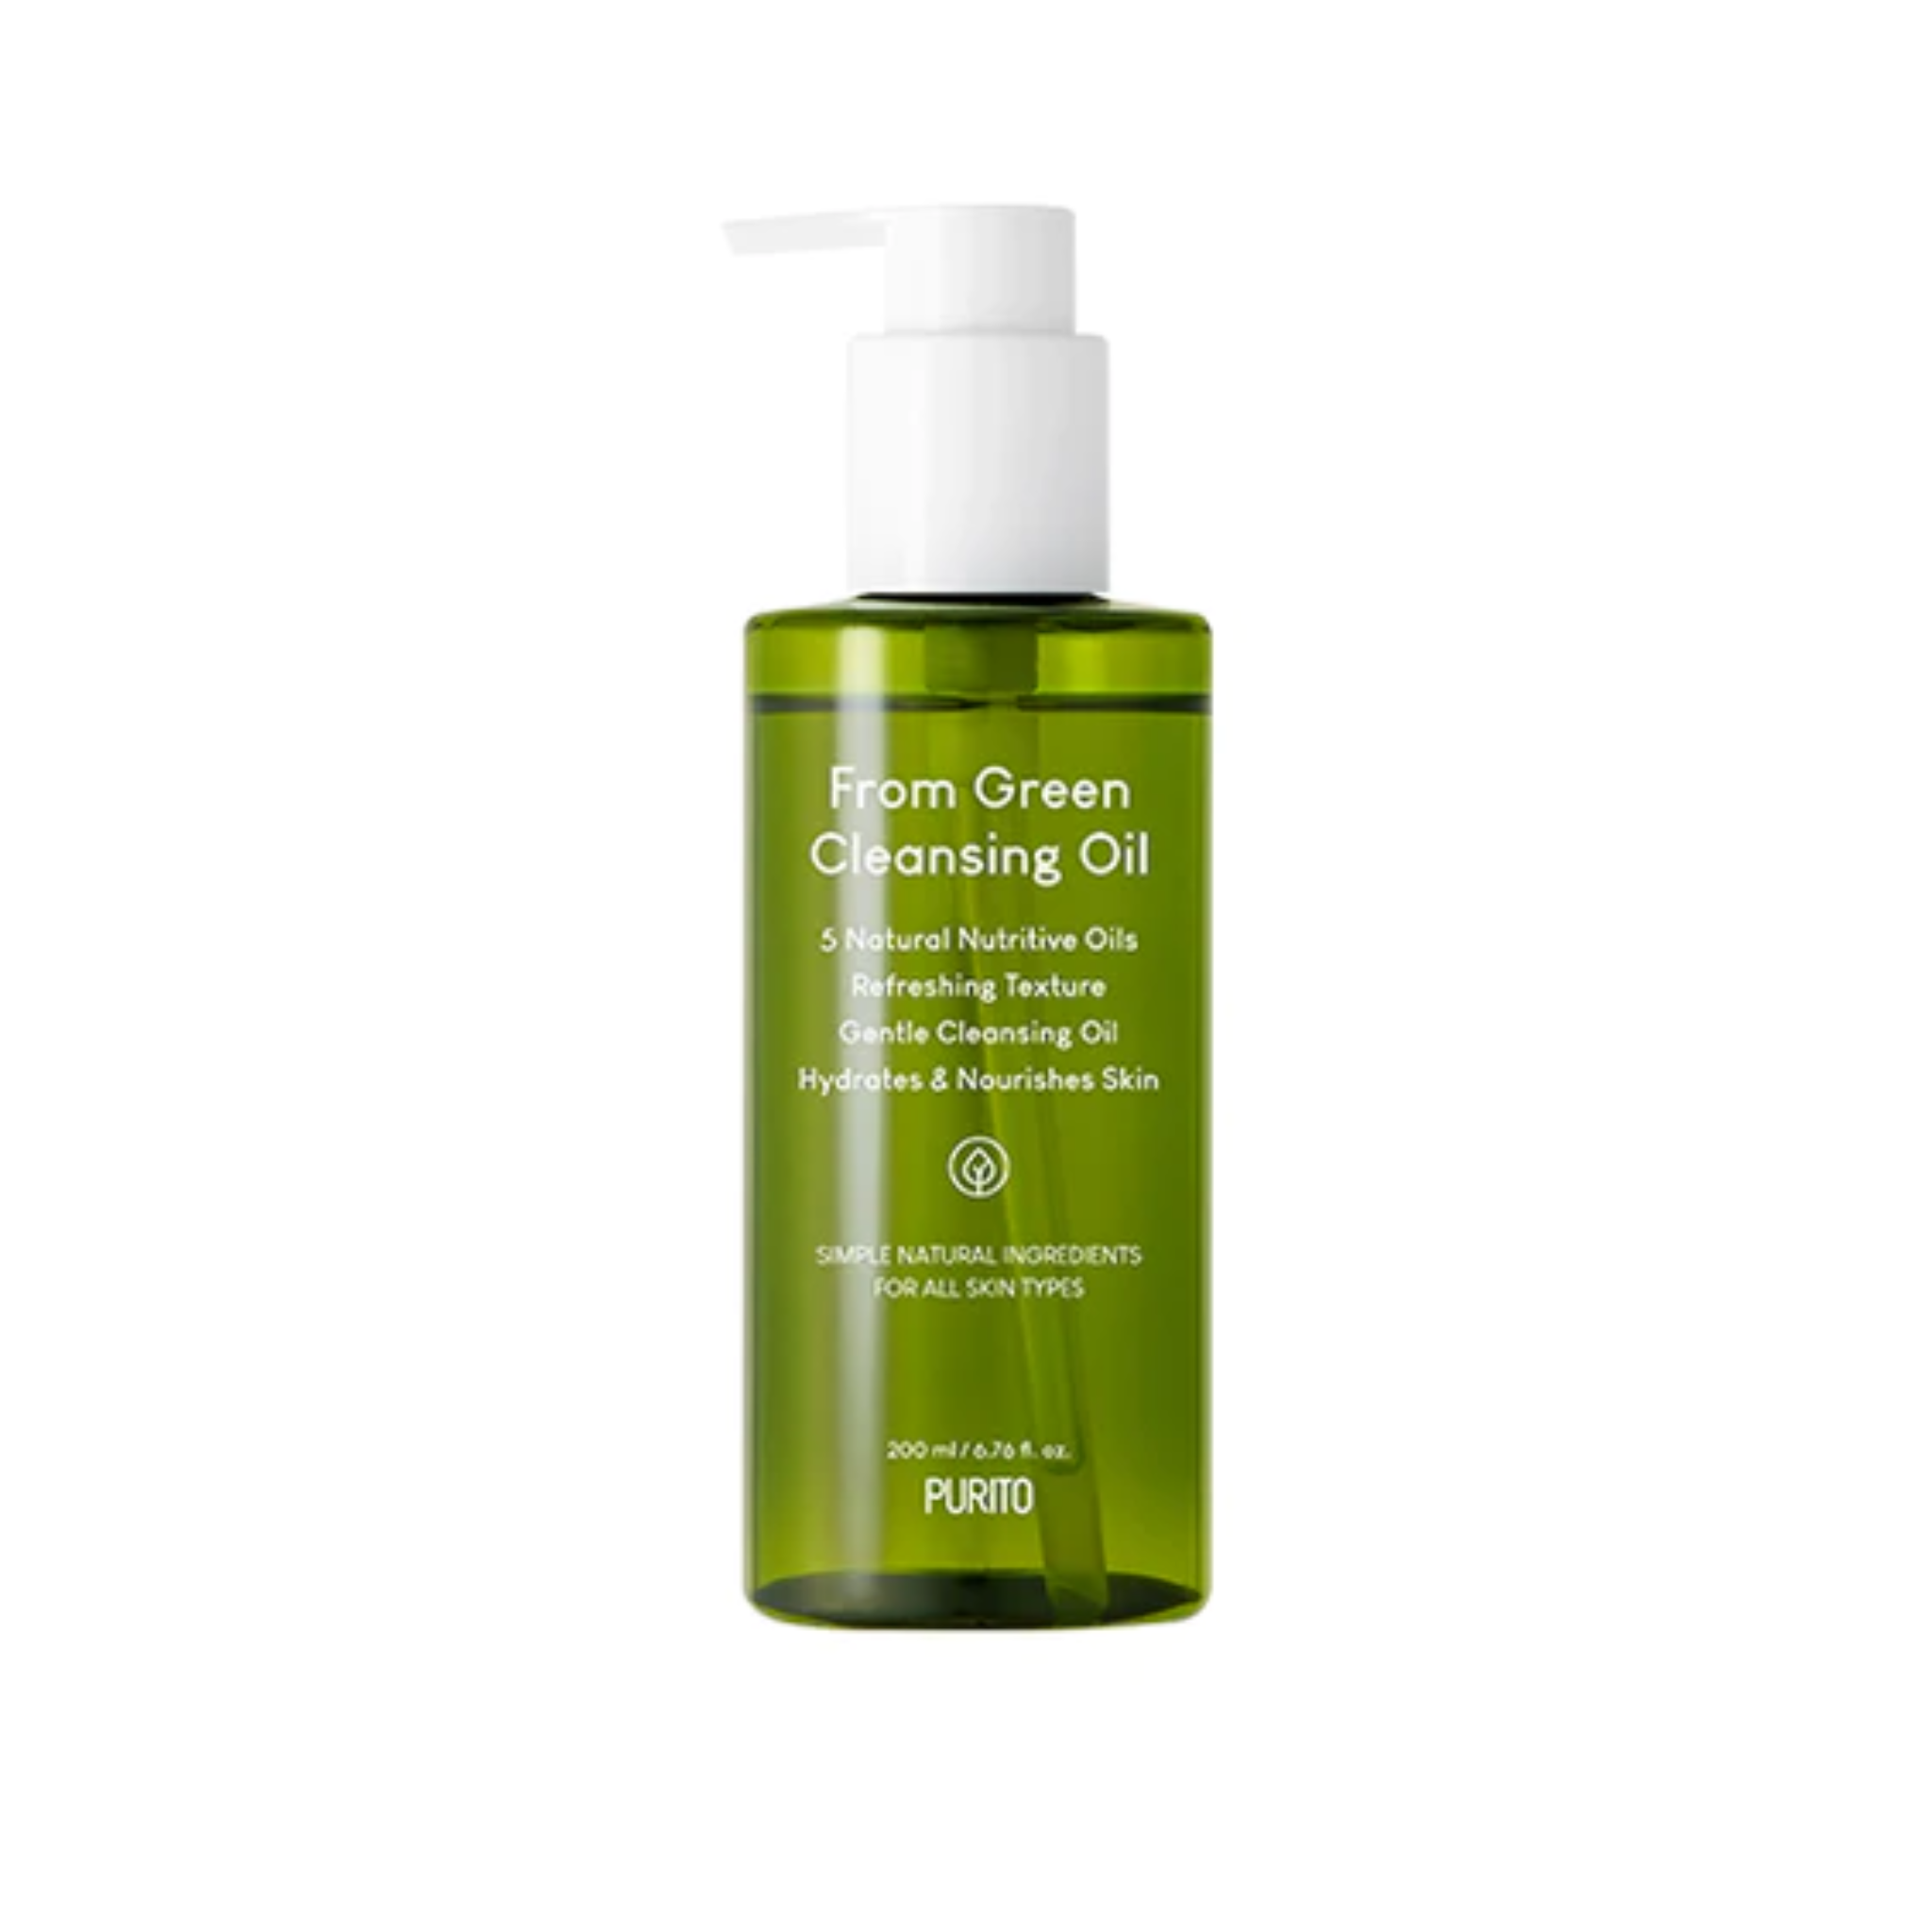 PURITO From Green Cleansing Oil (200ml)